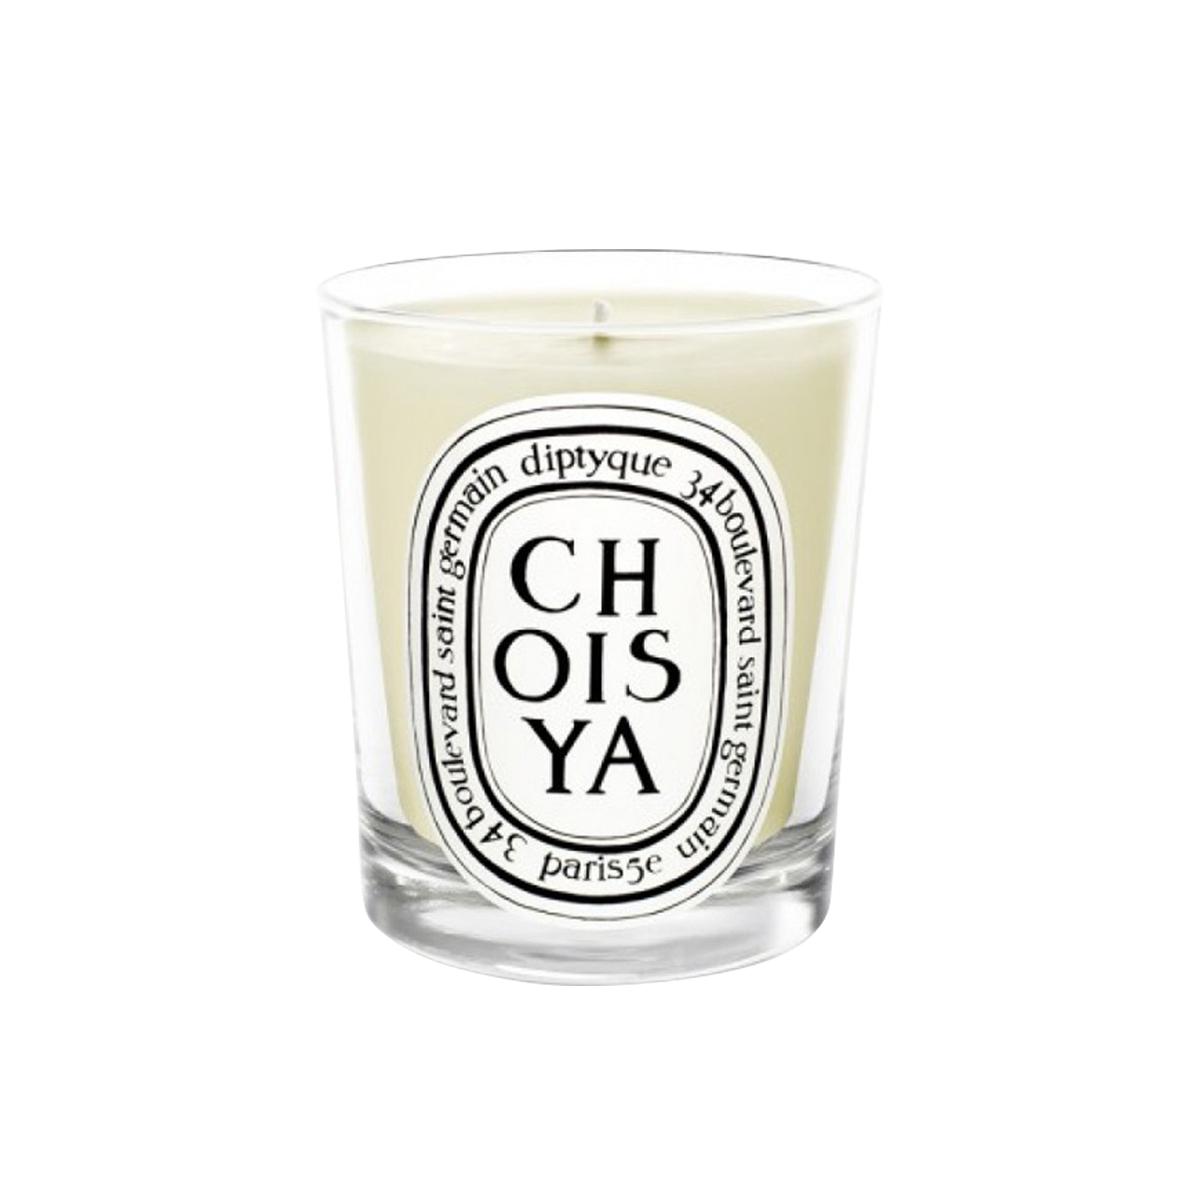 Primary image of Choisya (Mexican Orange Blossom) Candle